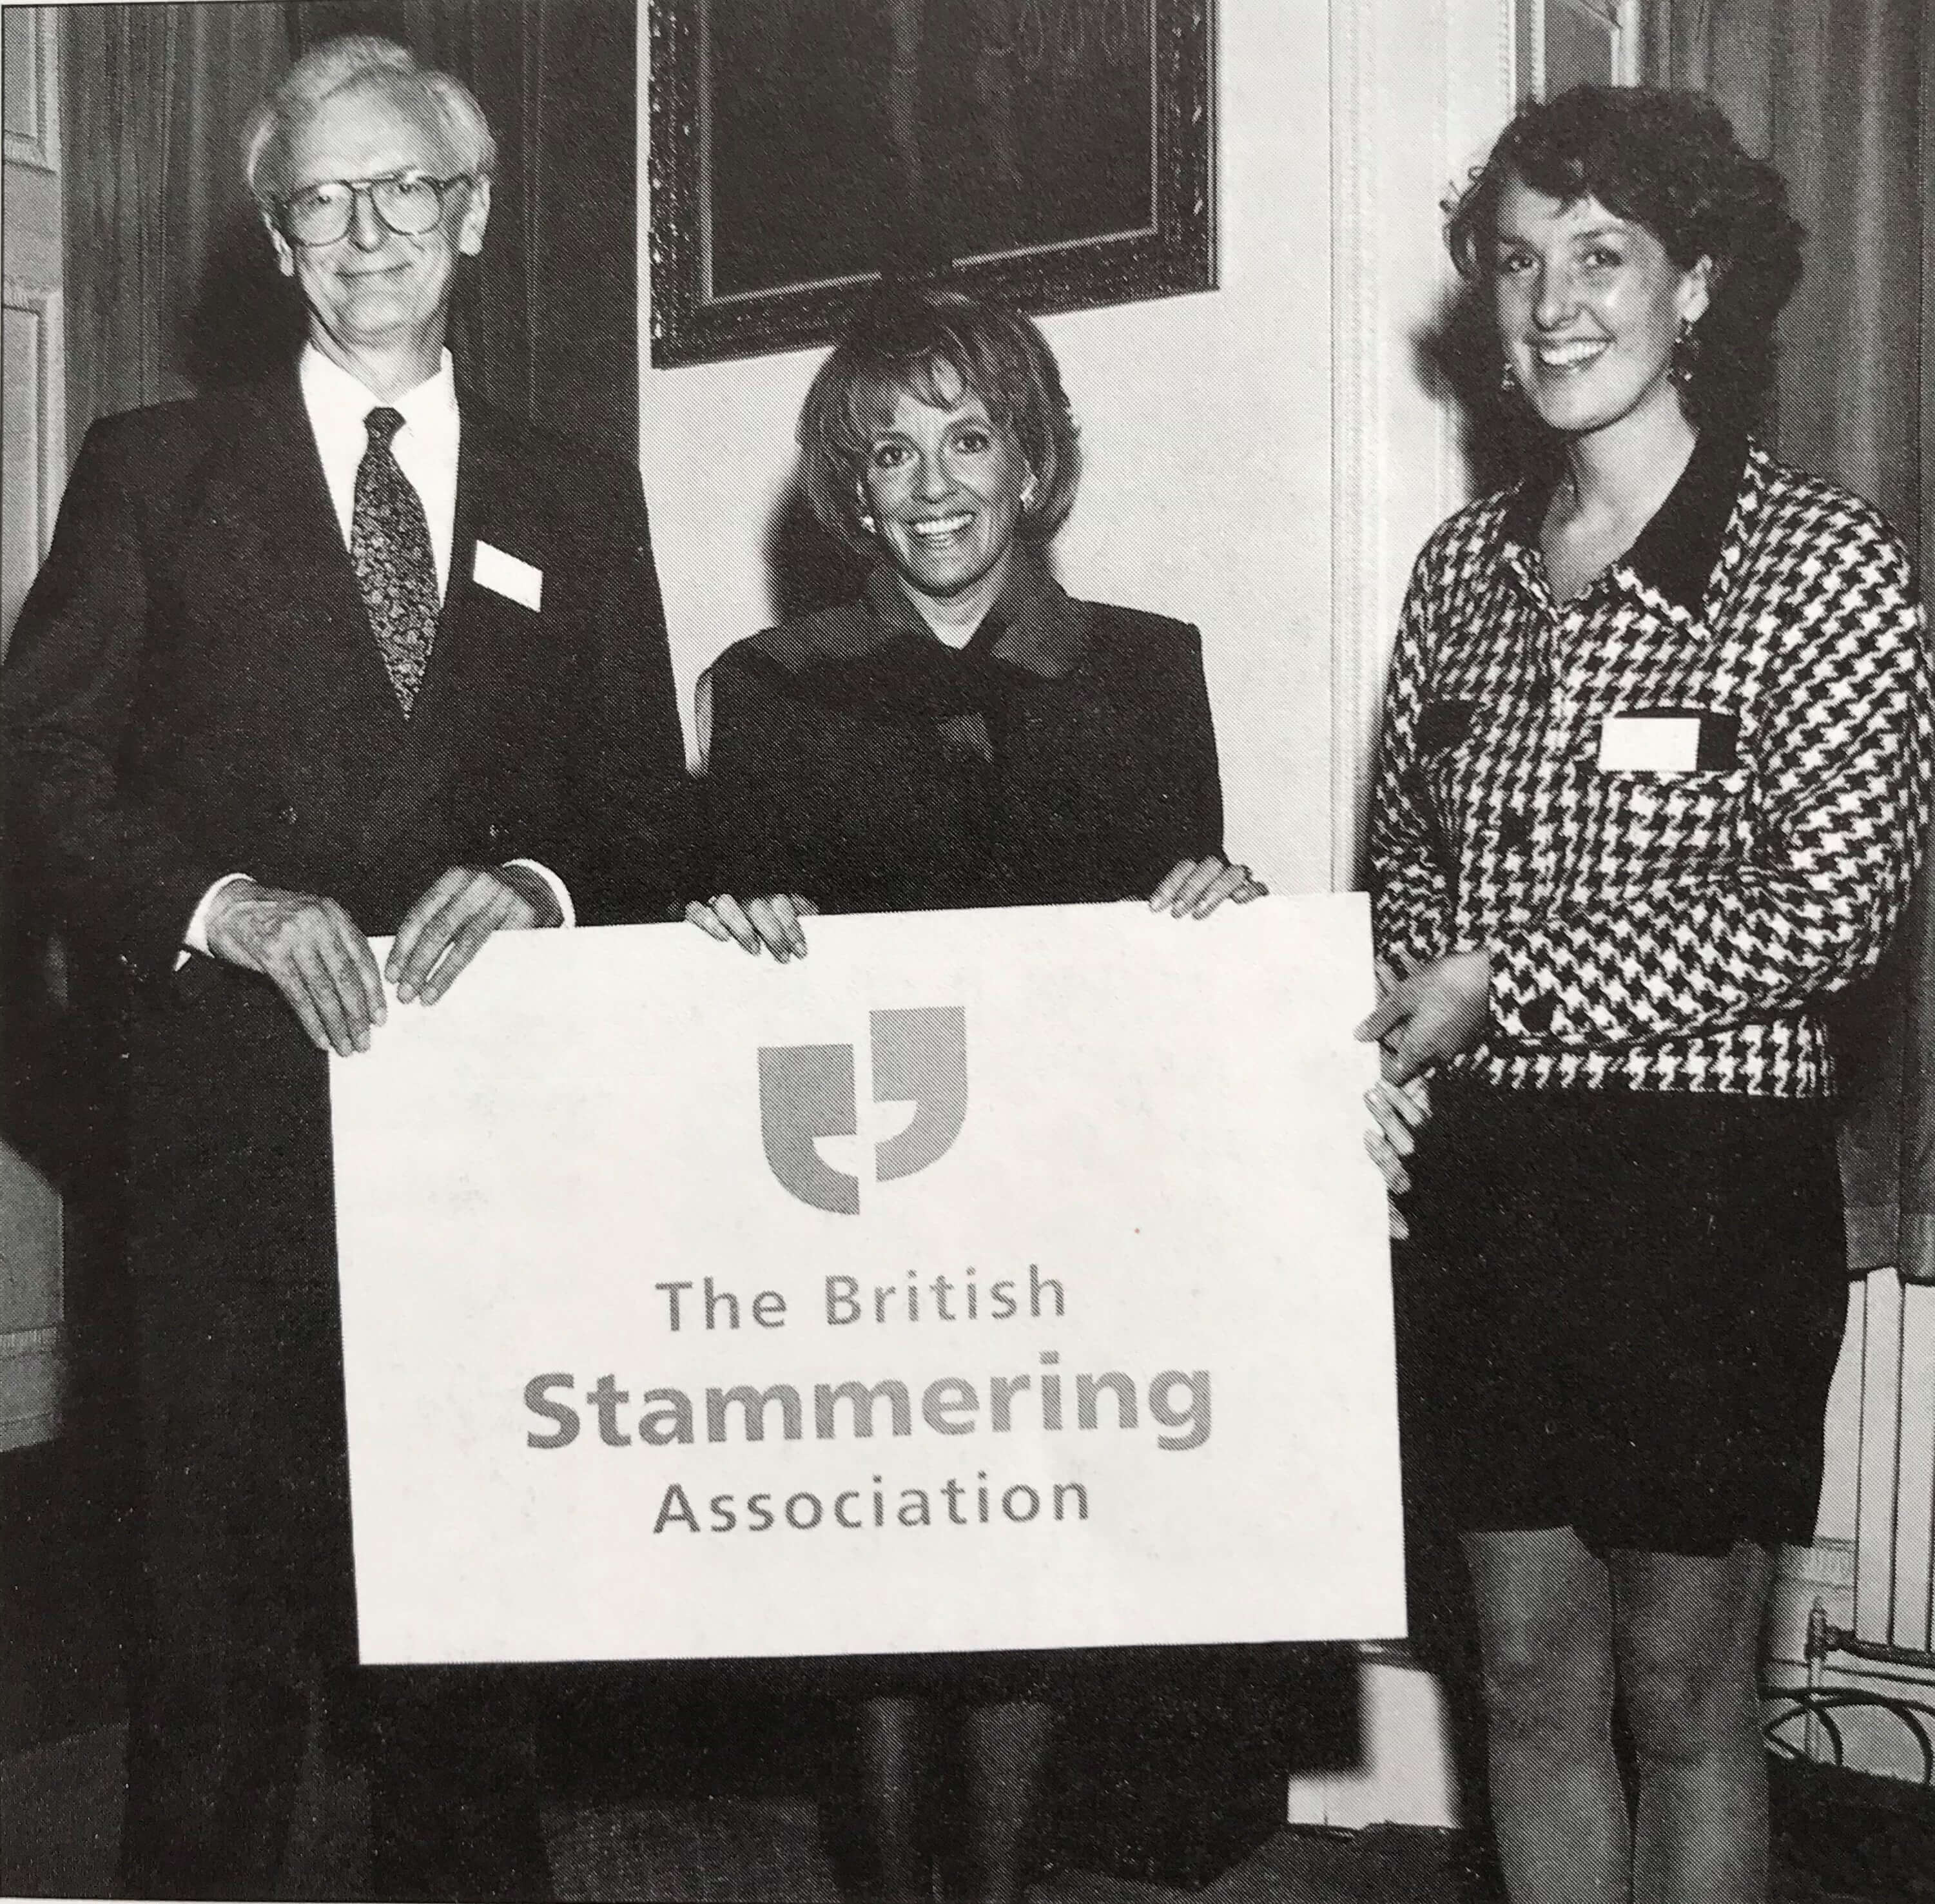 A man and two women holding a sign with the British Stammering Association logo on it